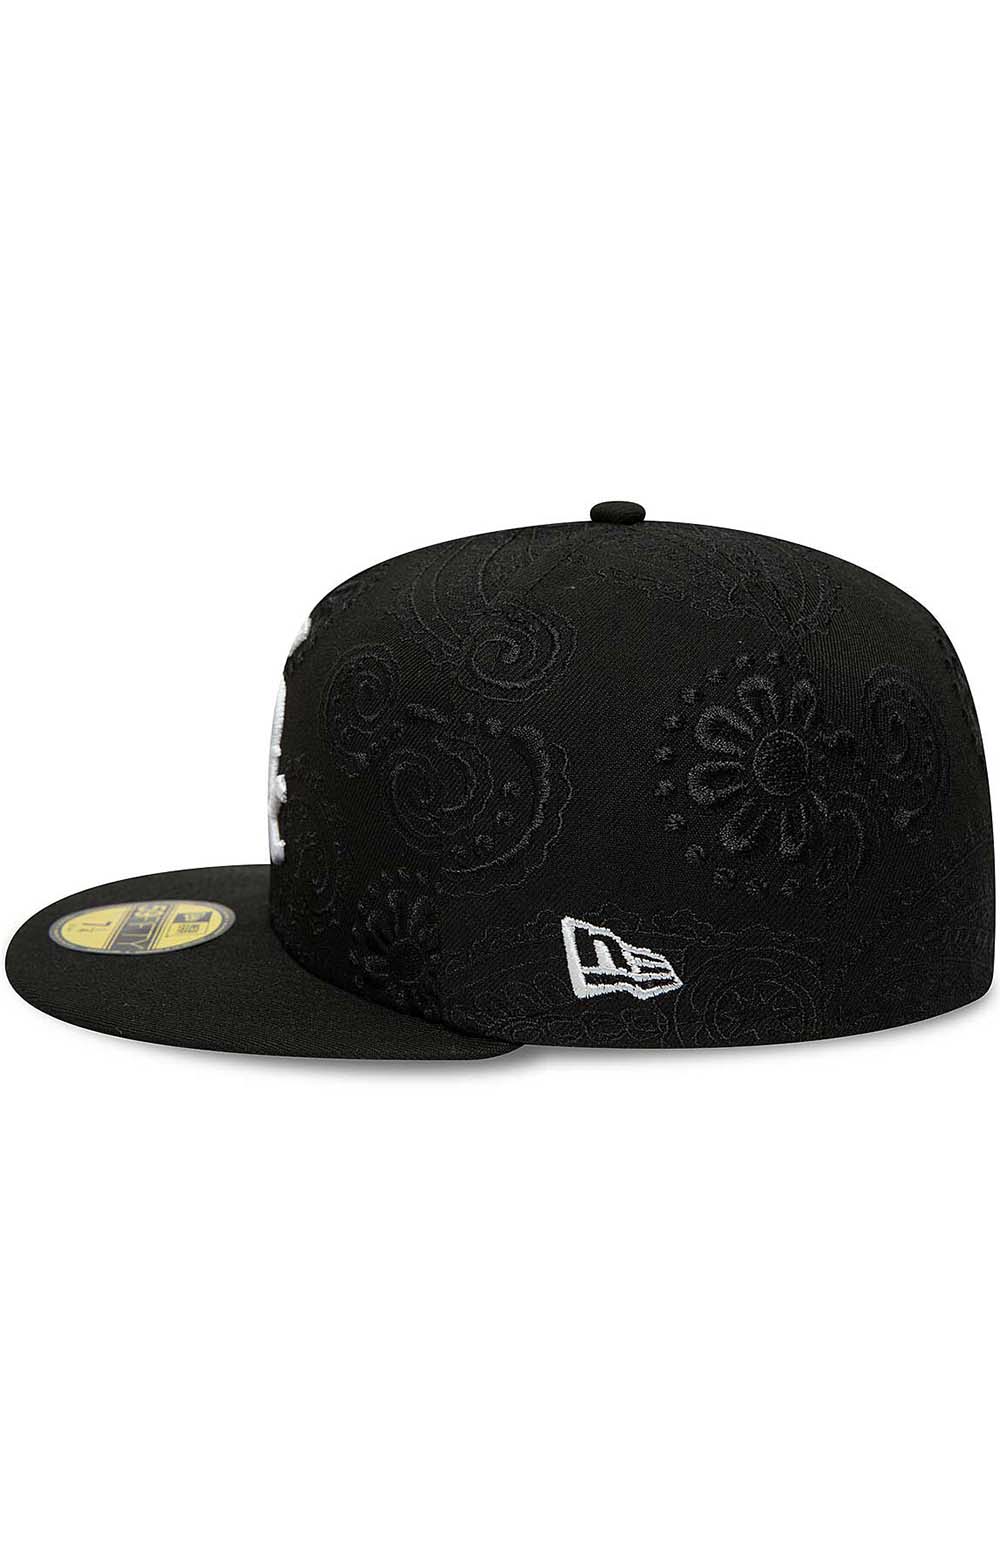 Chicago White Sox Swirl 59FIFTY Fitted Hat